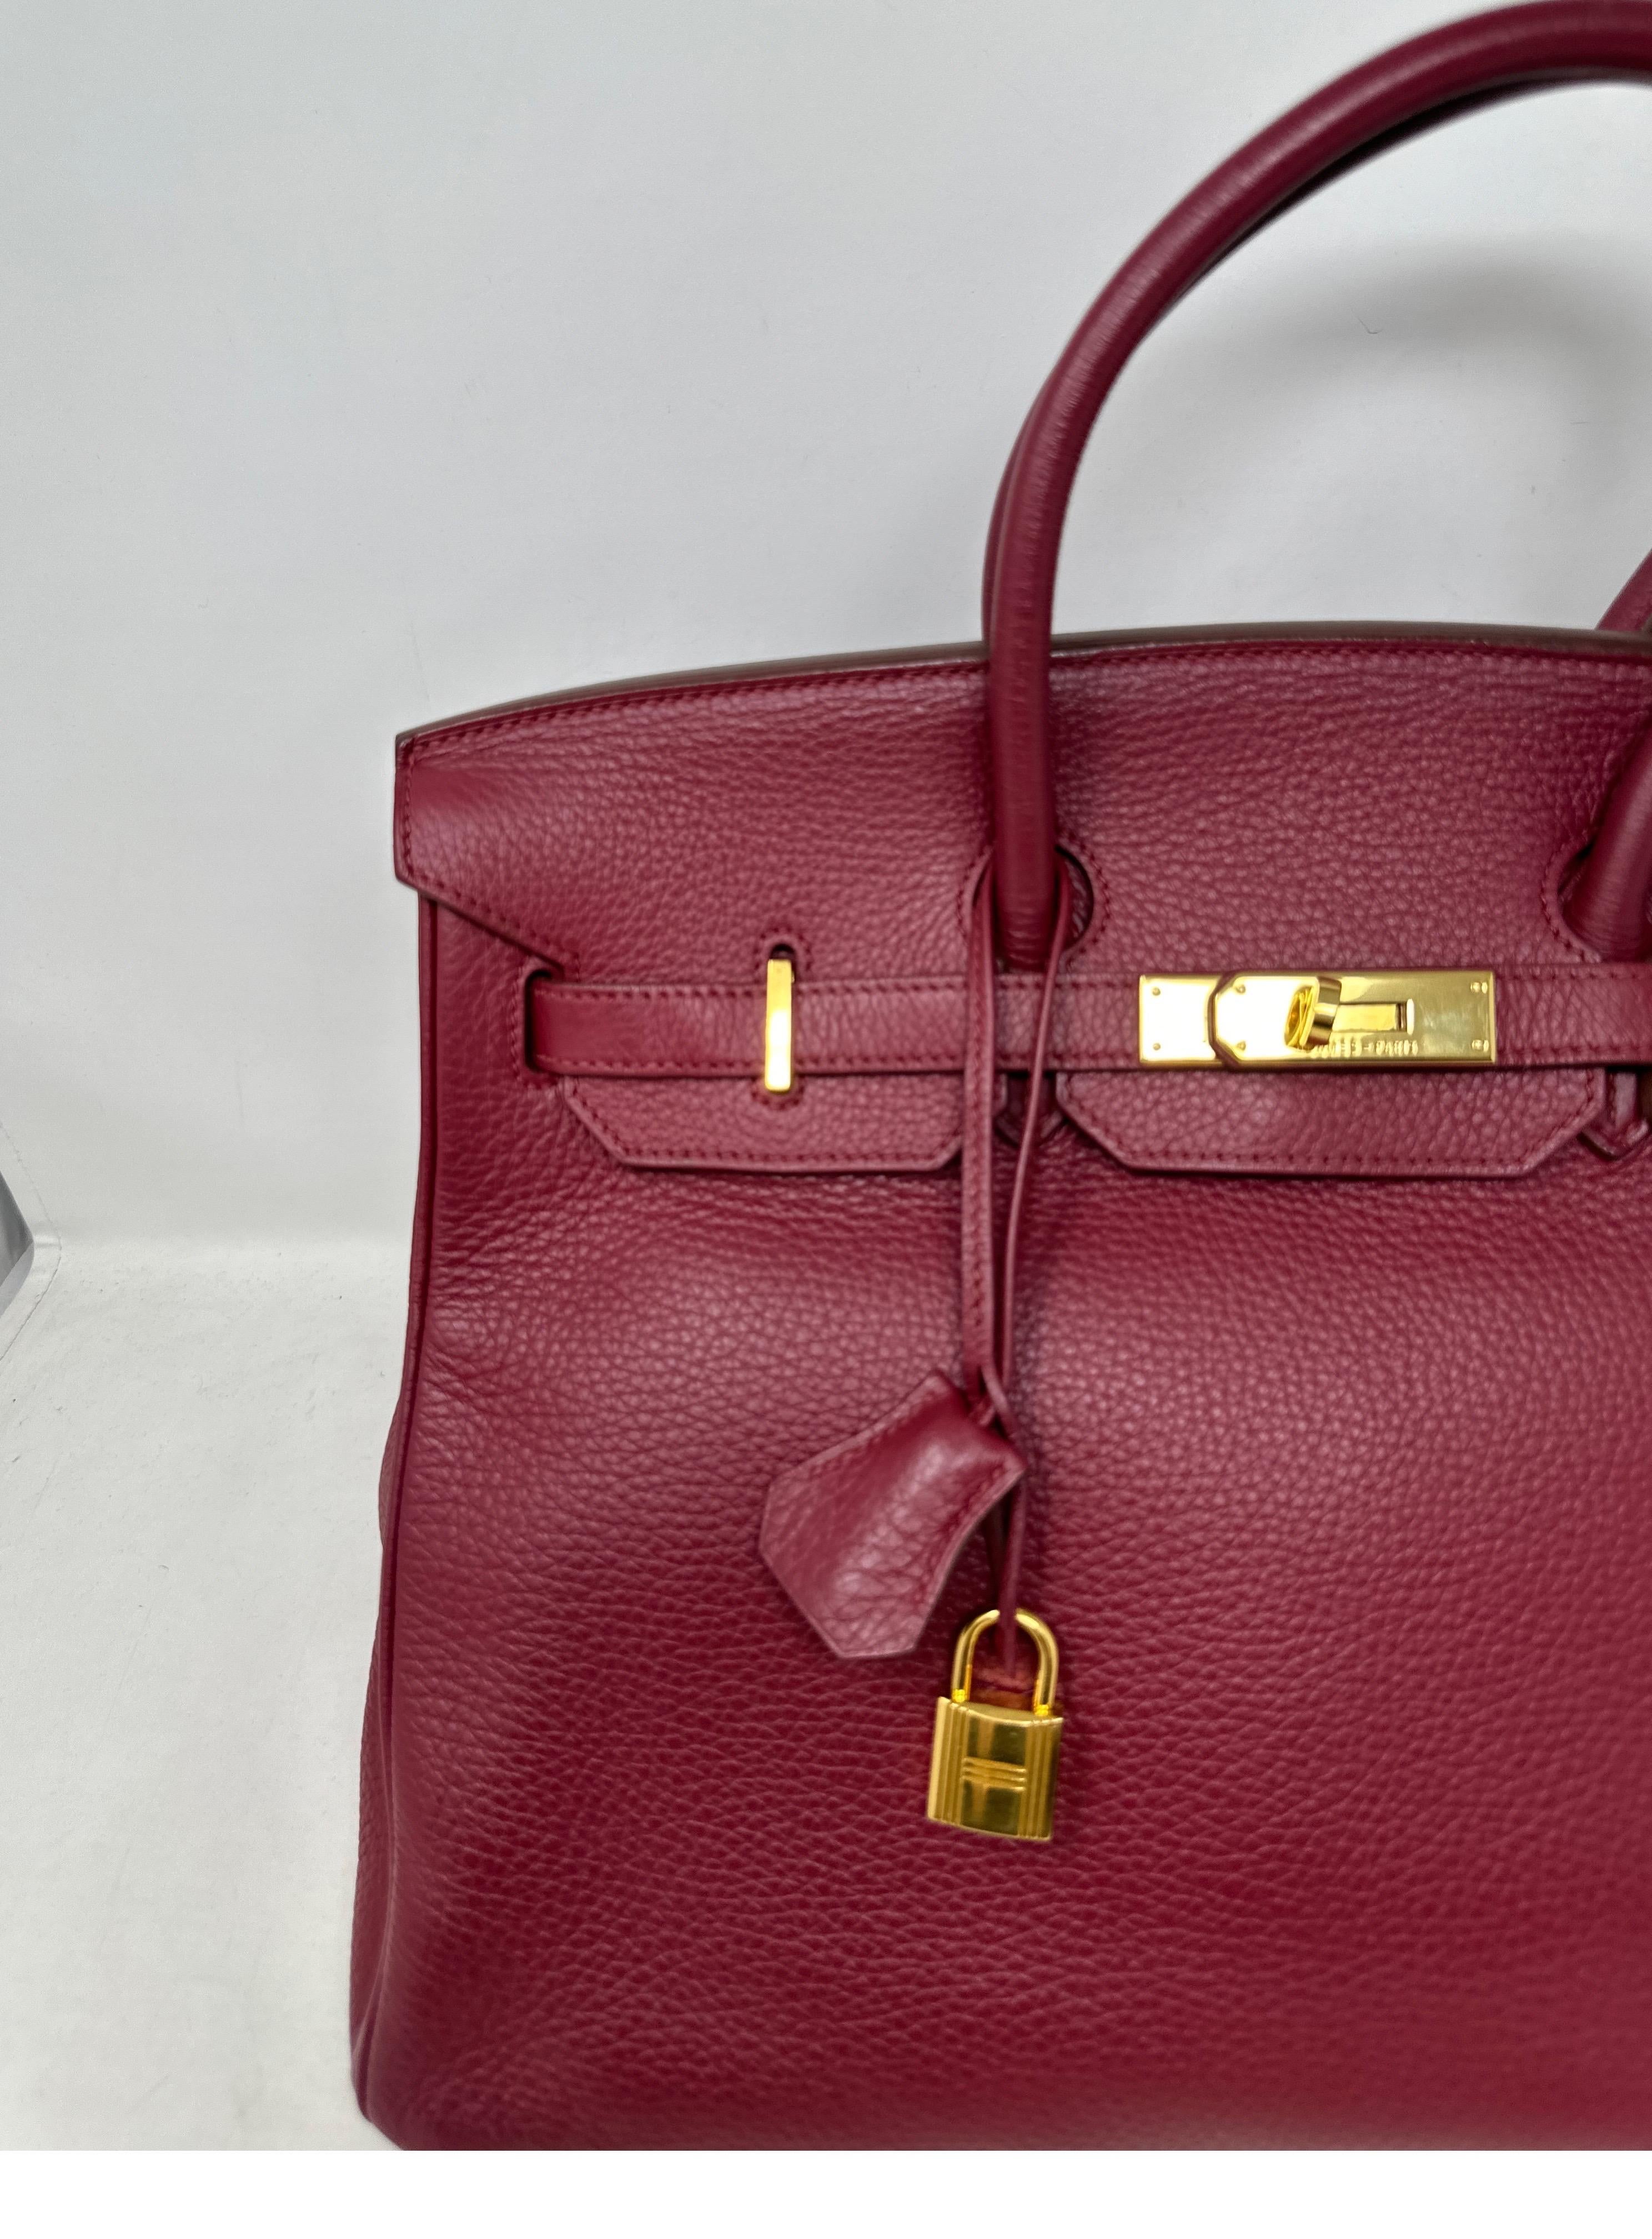 Hermes Rouge Birkin 35 Bag  In Good Condition For Sale In Athens, GA